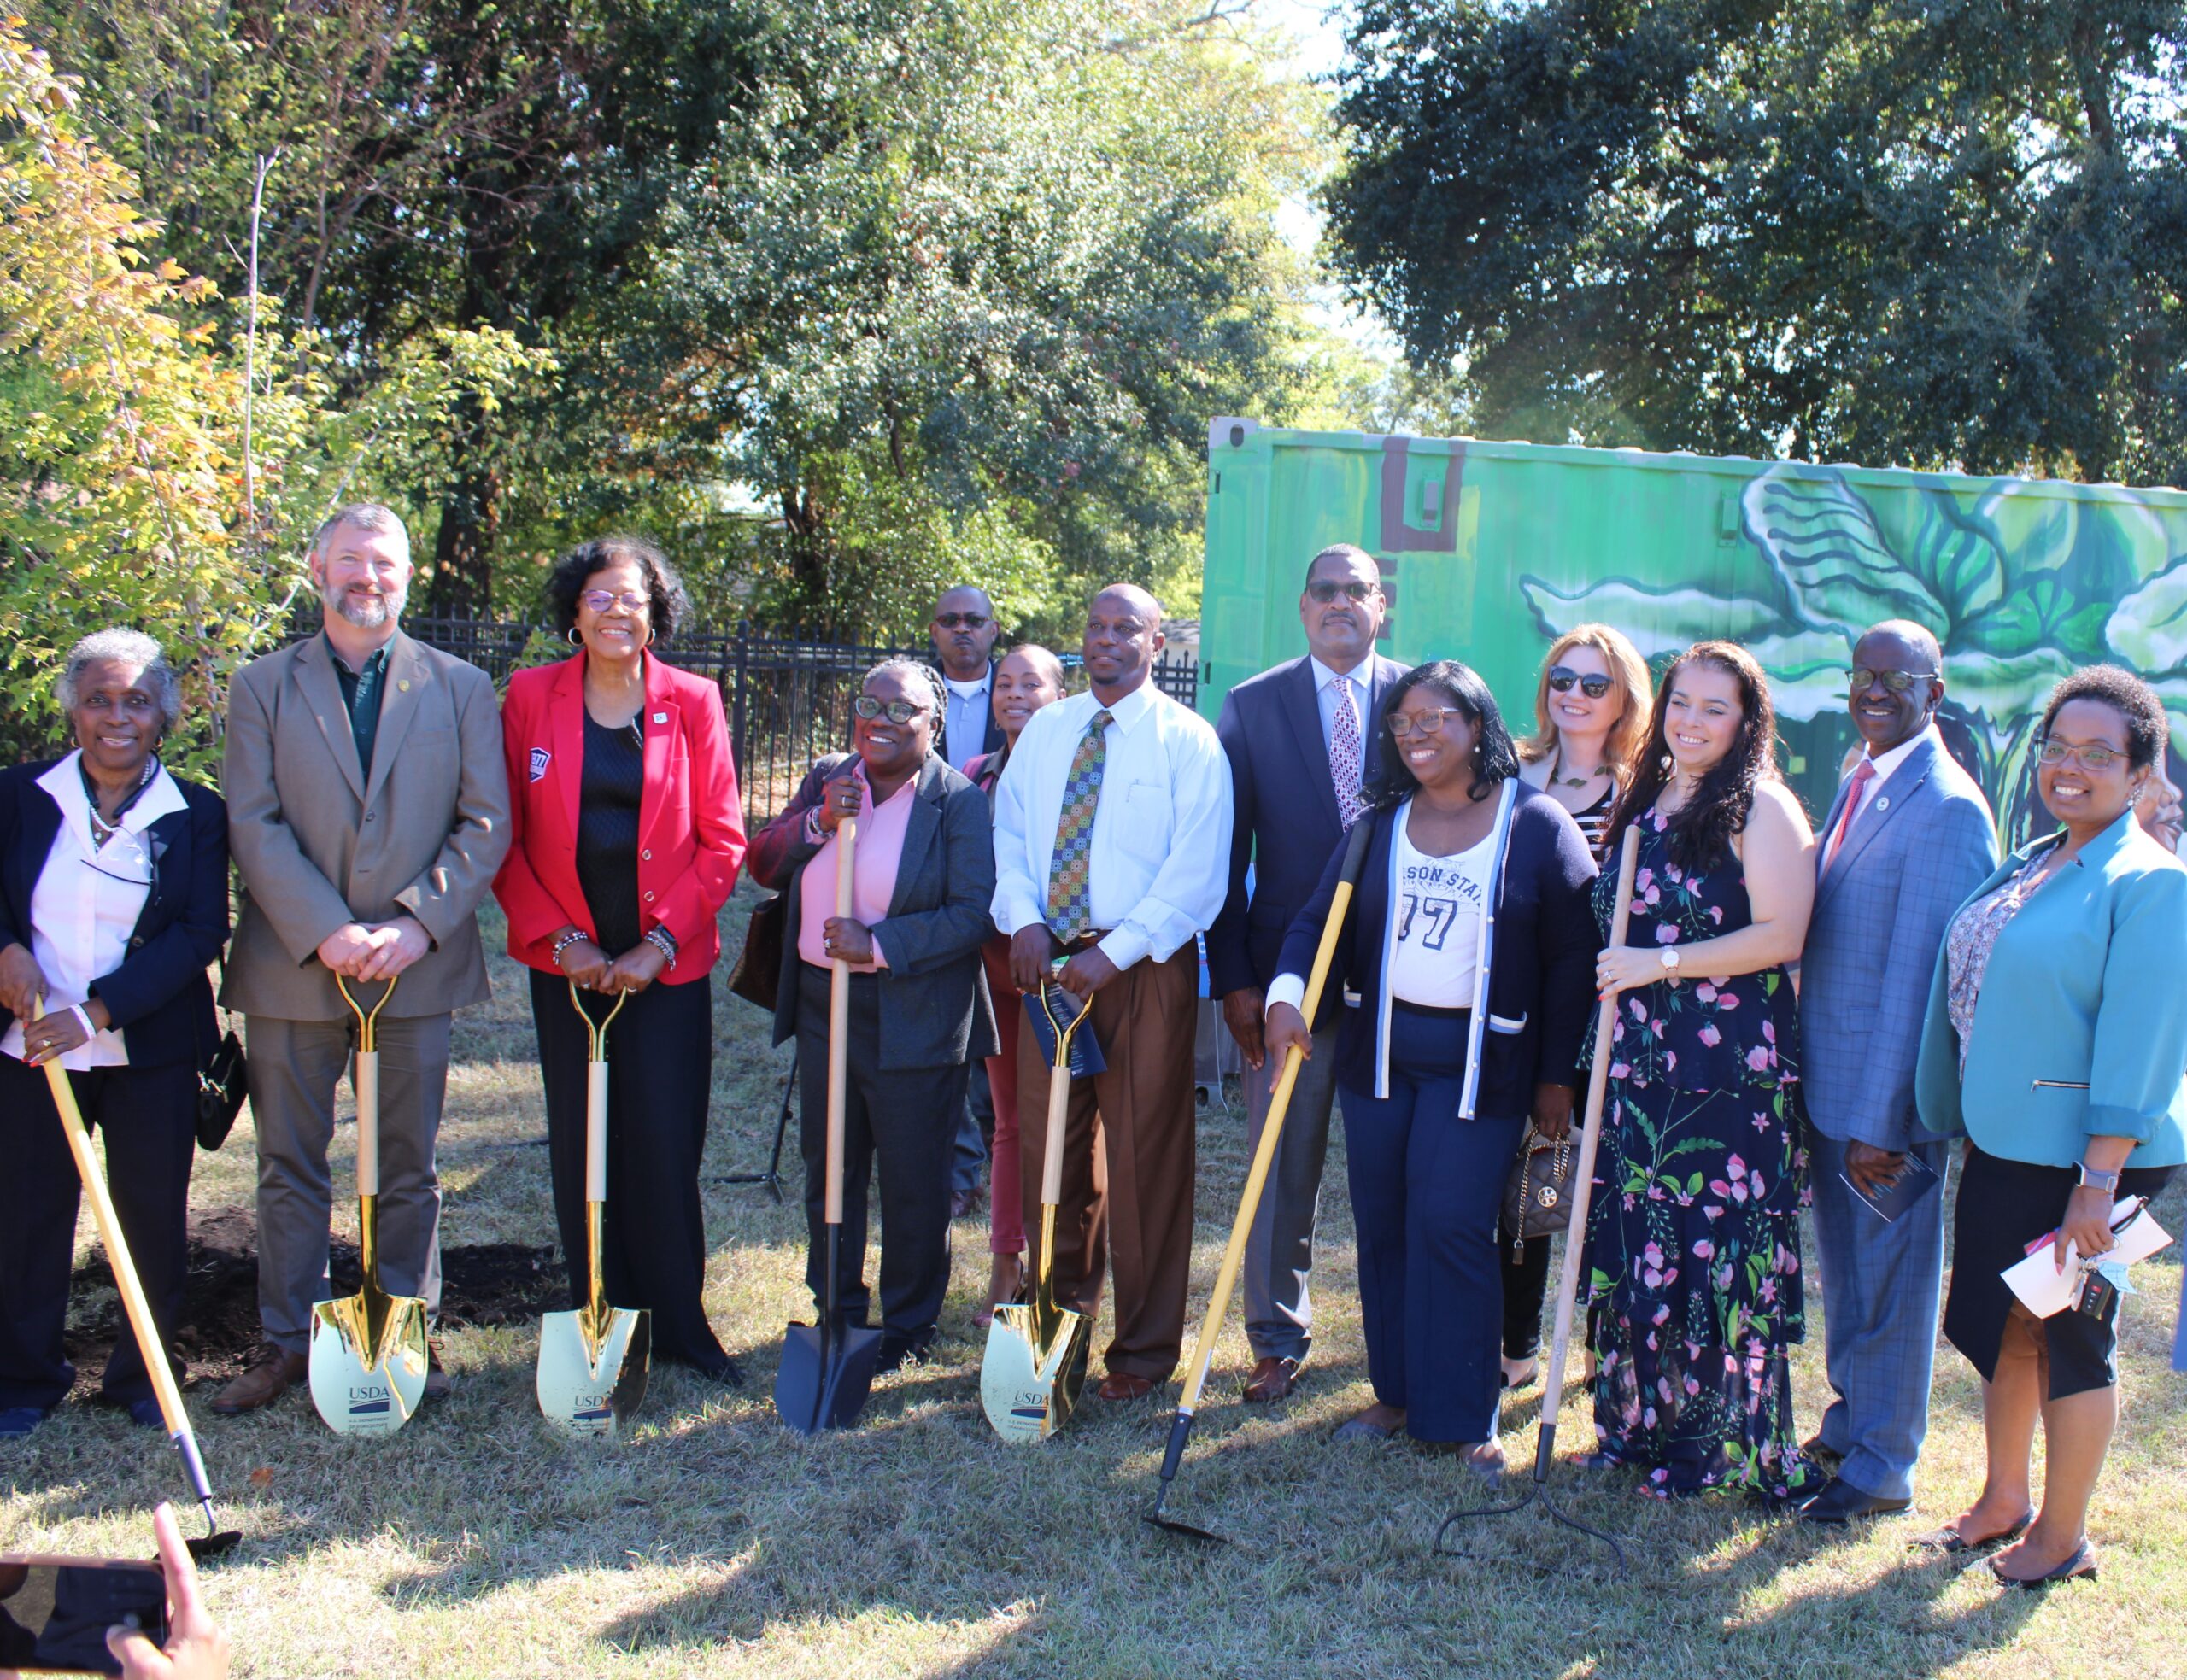 Group poses with shovels at a tree planting ceremony